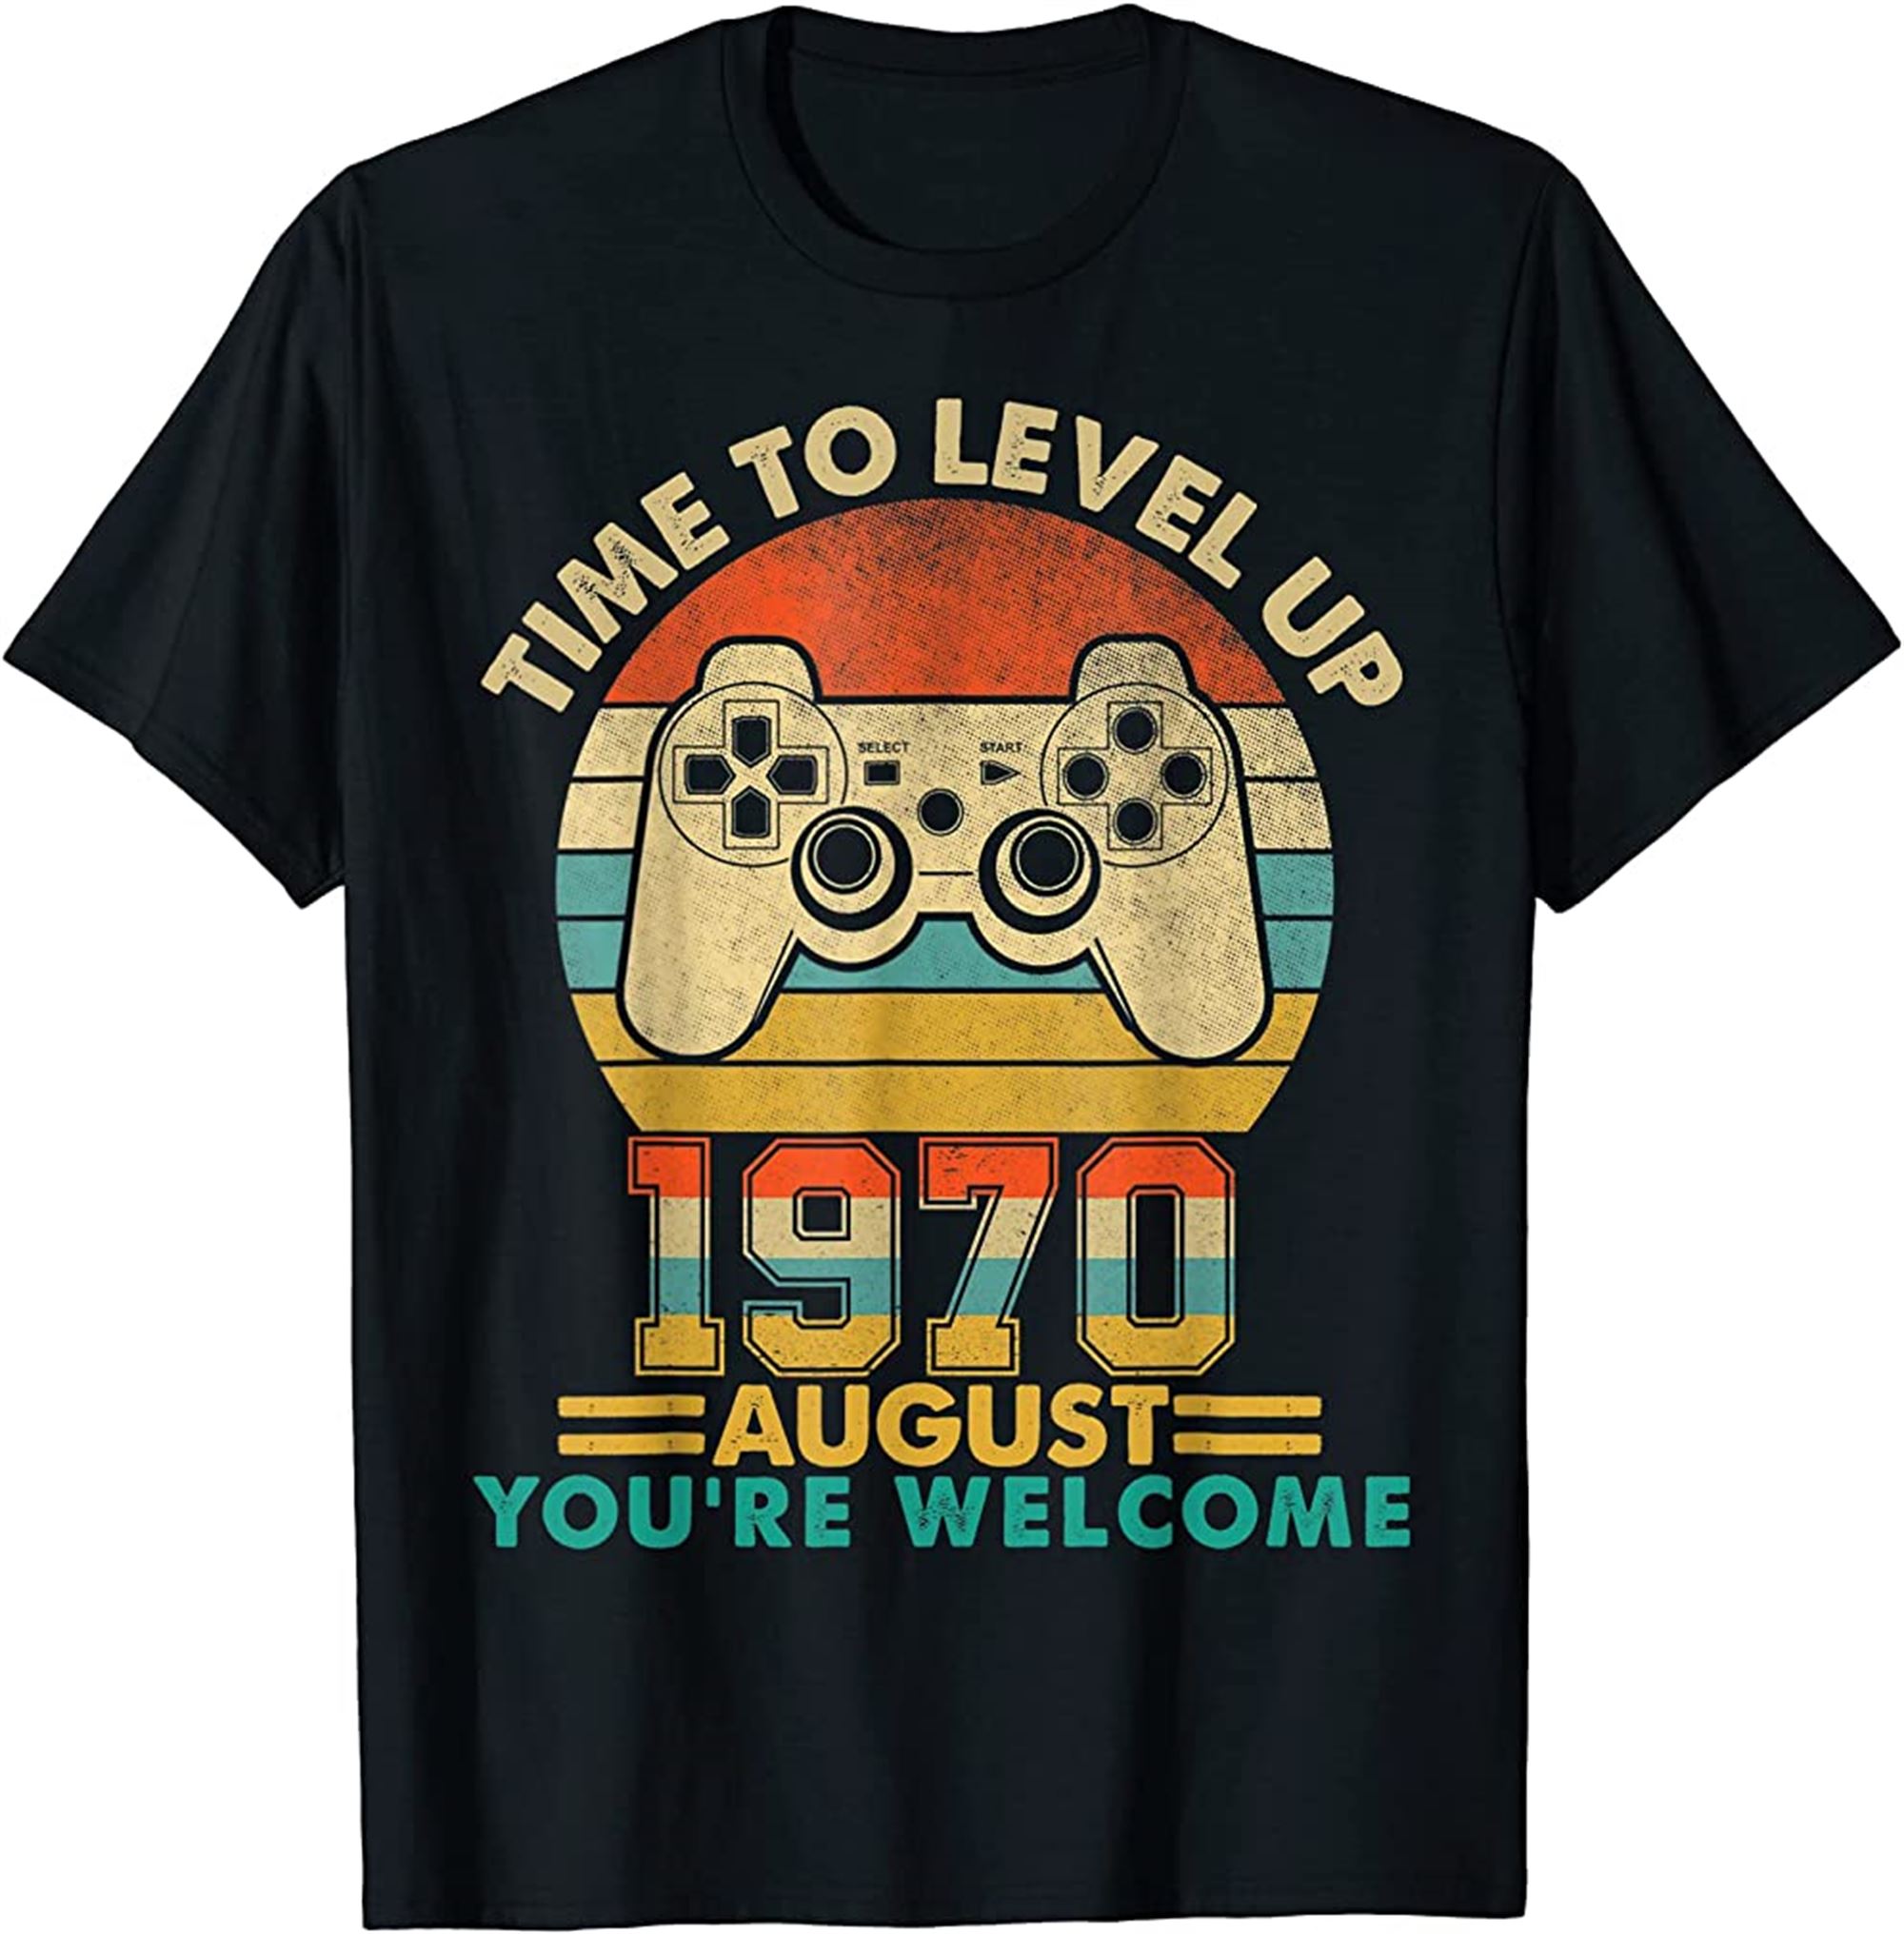 Vintage 1970 August 52 Years Old Video Gamer 52th Birthday T-shirt Plus Size Up To 5xl